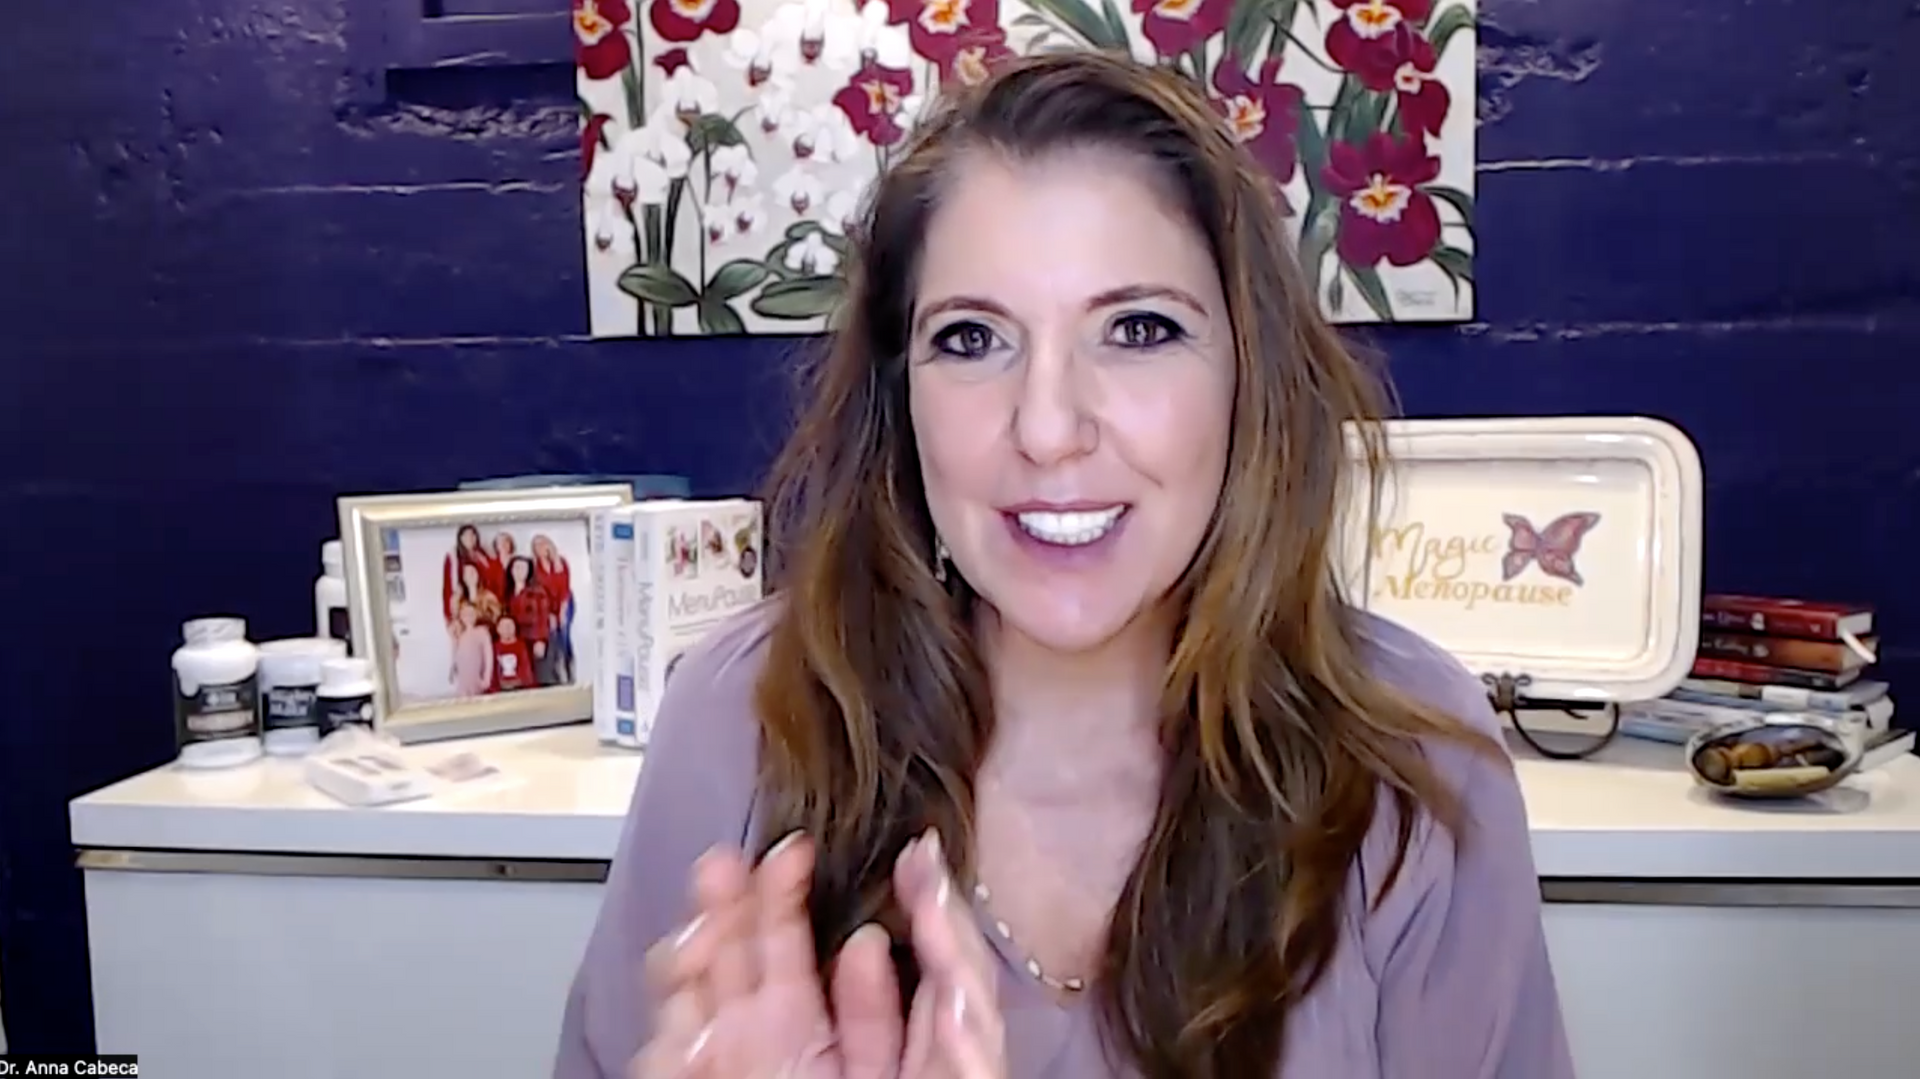 Load video: Dr. Anna Cabeca introduces the Menopause Kit